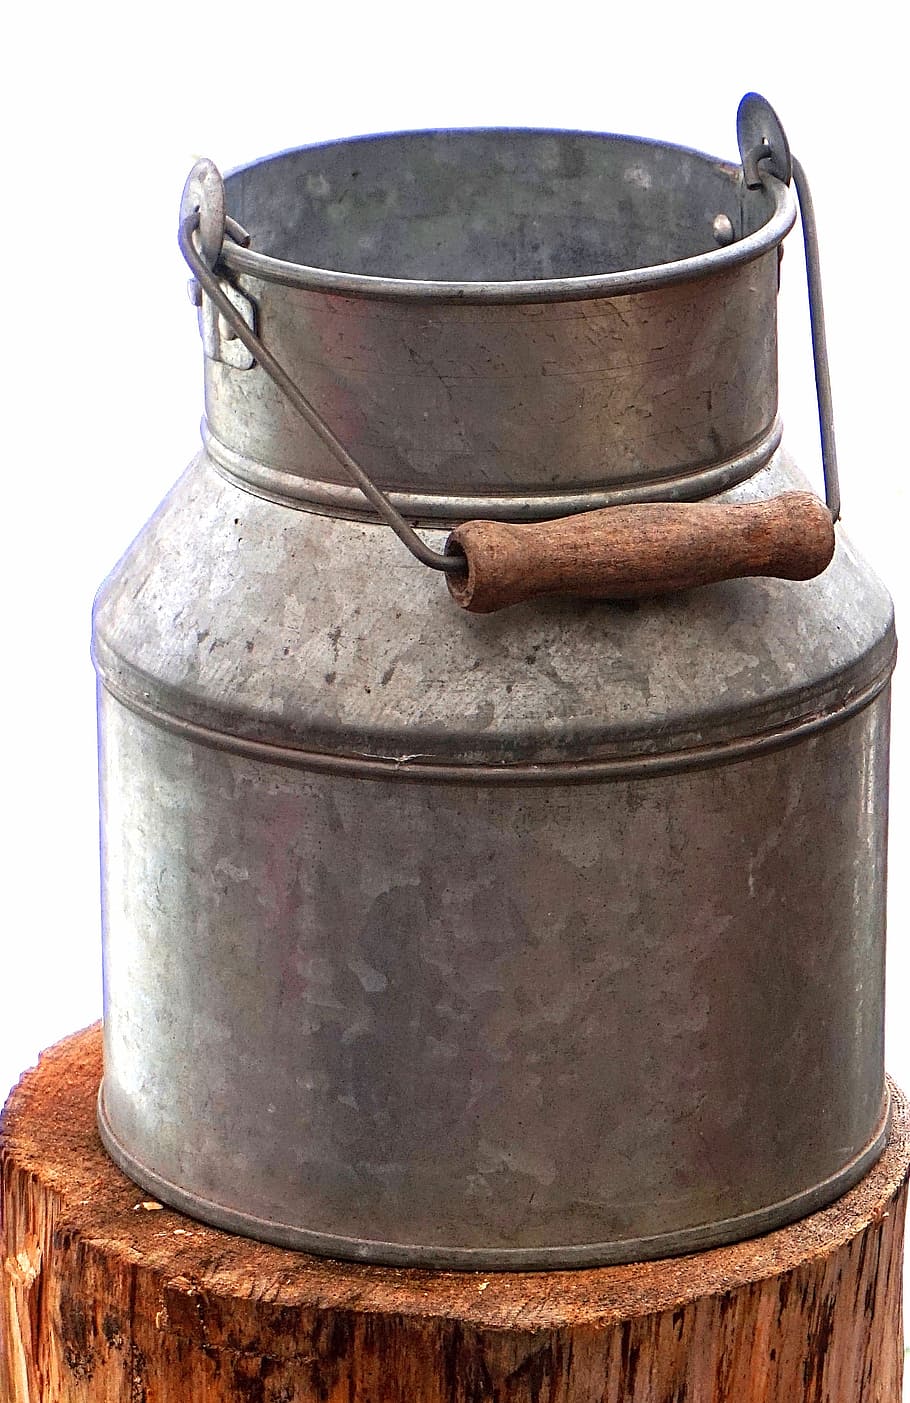 milk can, rusty, container, steel, old, metallic, metal, still life, household equipment, wood - material